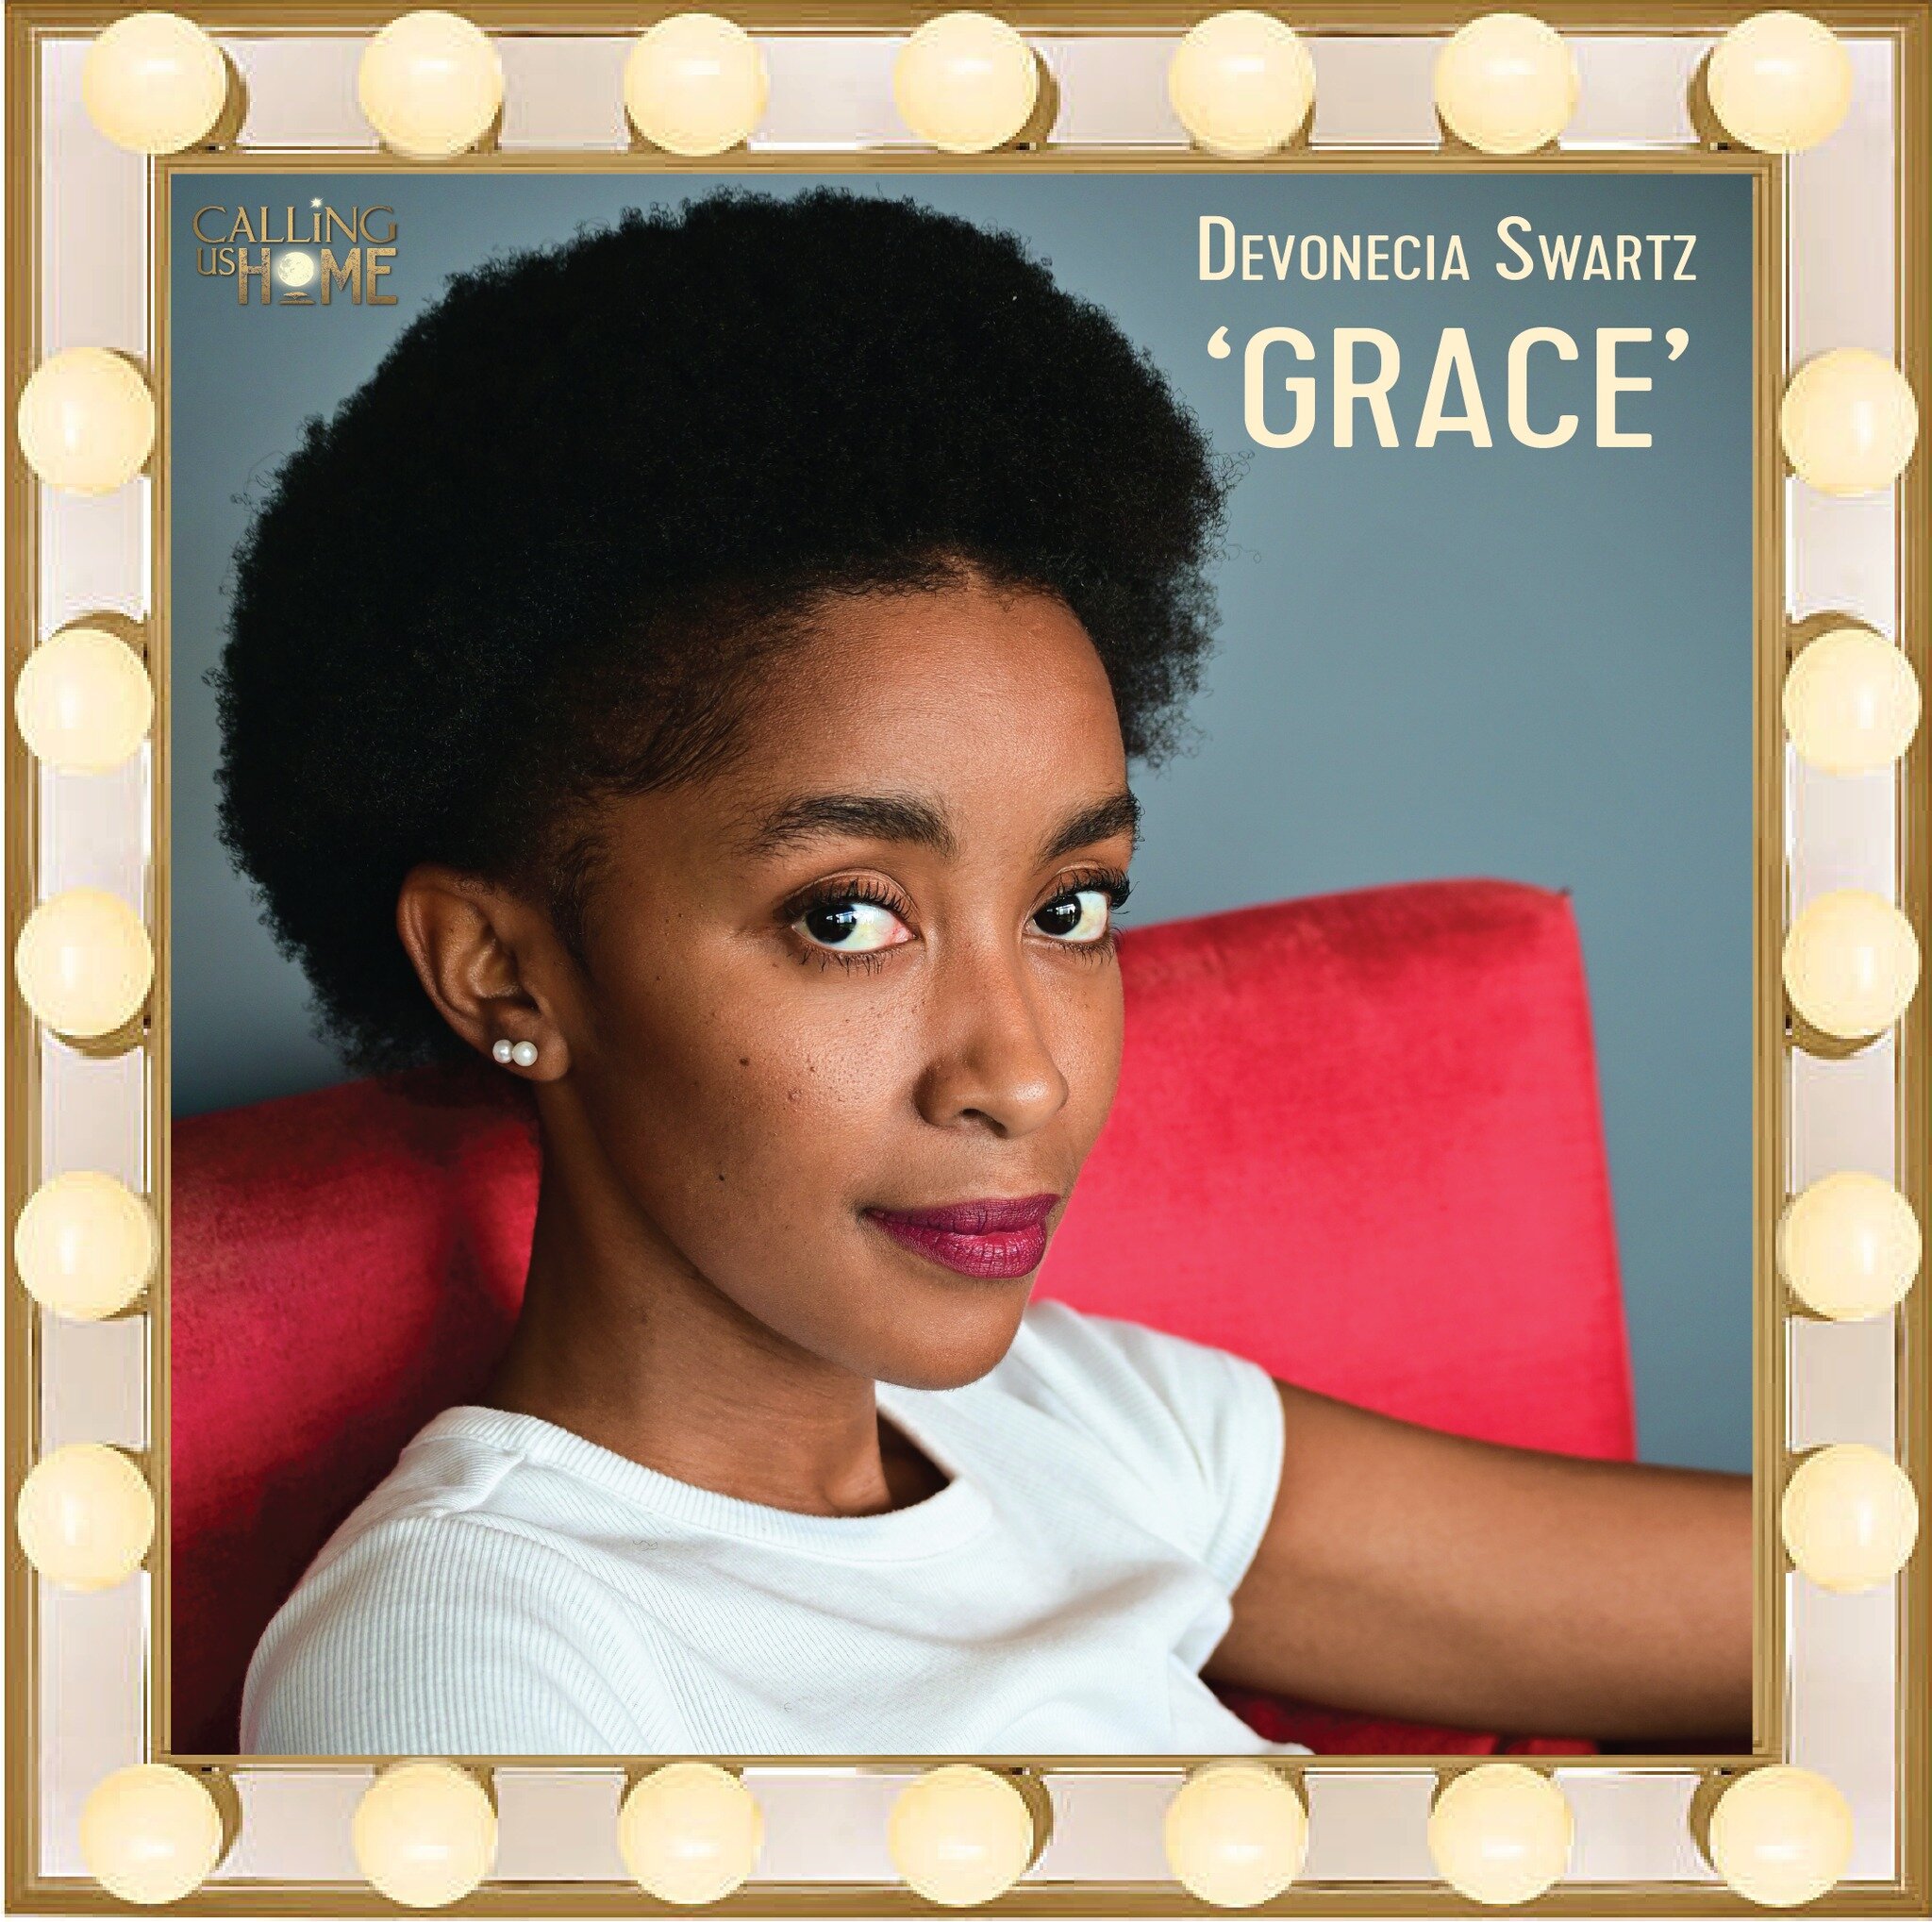 Meet our new GRACE, Devonecia Swartz 💙

Swipe to learn a little more about our leading lady ⭐️ and click the link in our bio to hear her beautiful voice #FireInHisKiss 🎶

Also, DON&rsquo;T miss out on your chance to see her debut as GRACE in Februa